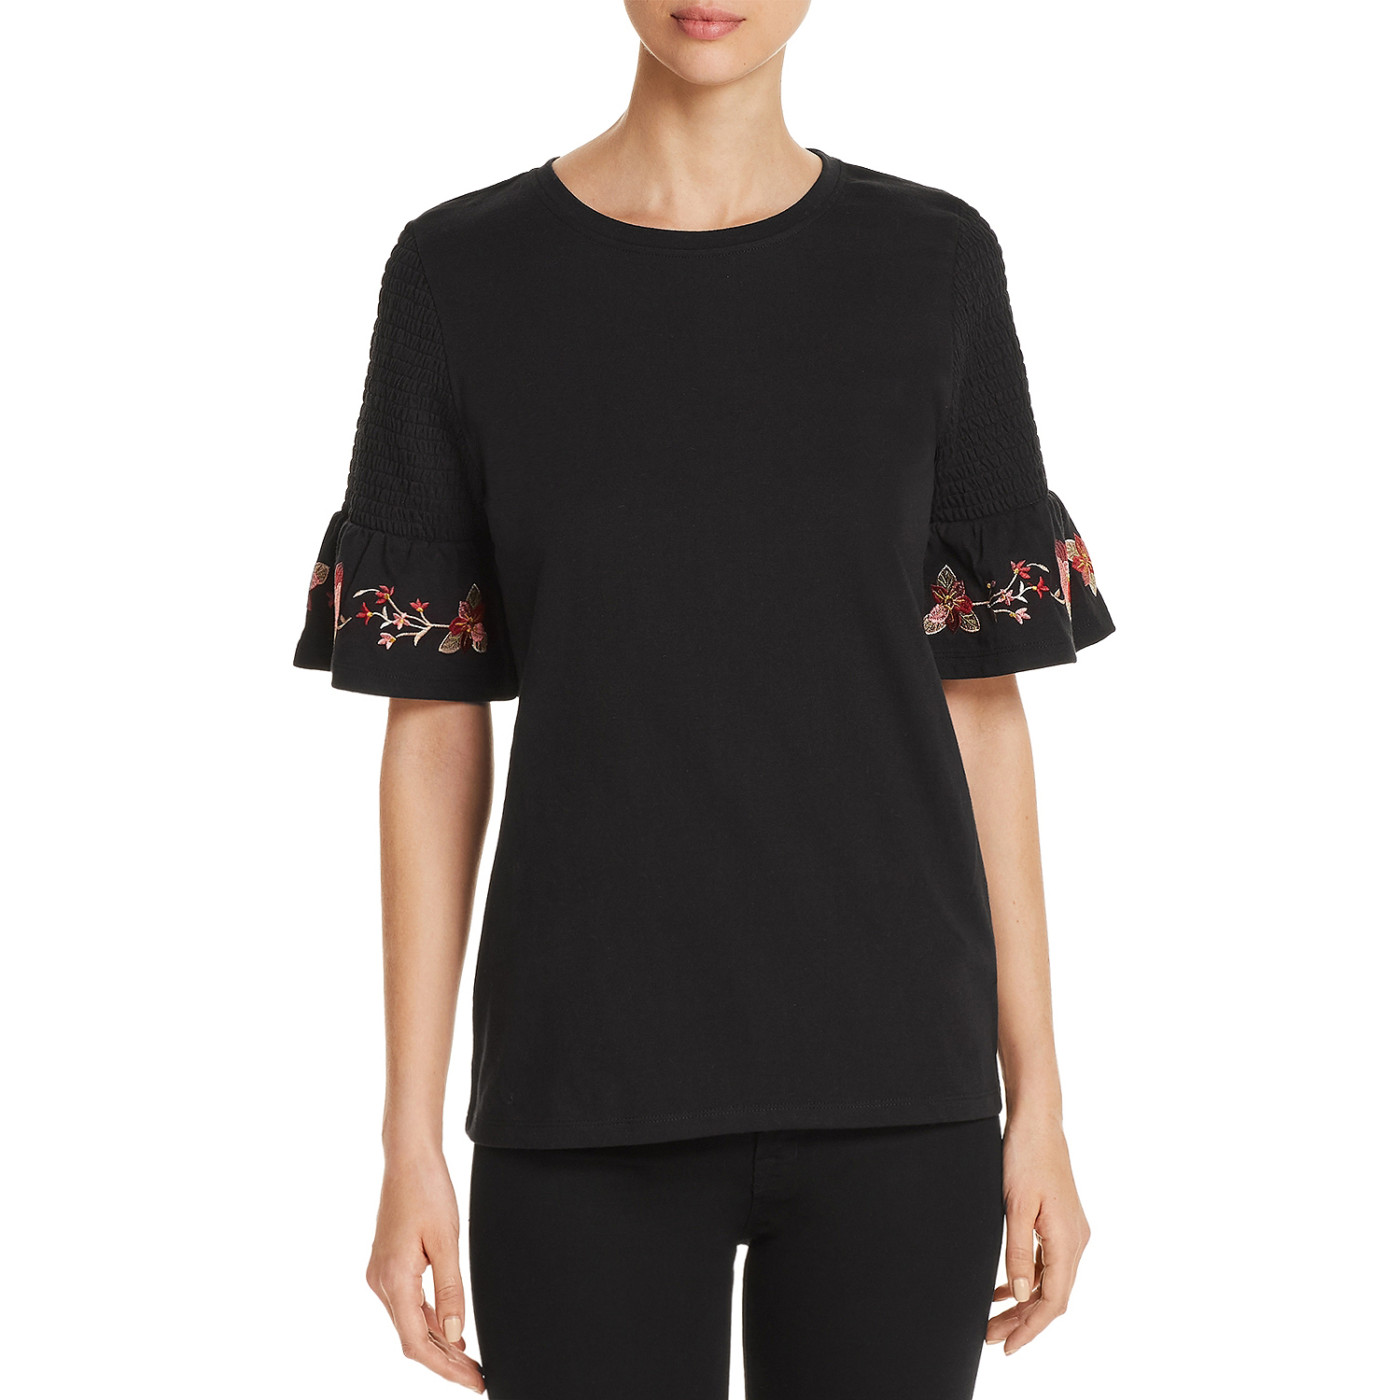 woocommerce-673321-2209615.cloudwaysapps.com-alison-andrews-womens-black-embroidered-smocked-sleeve-top